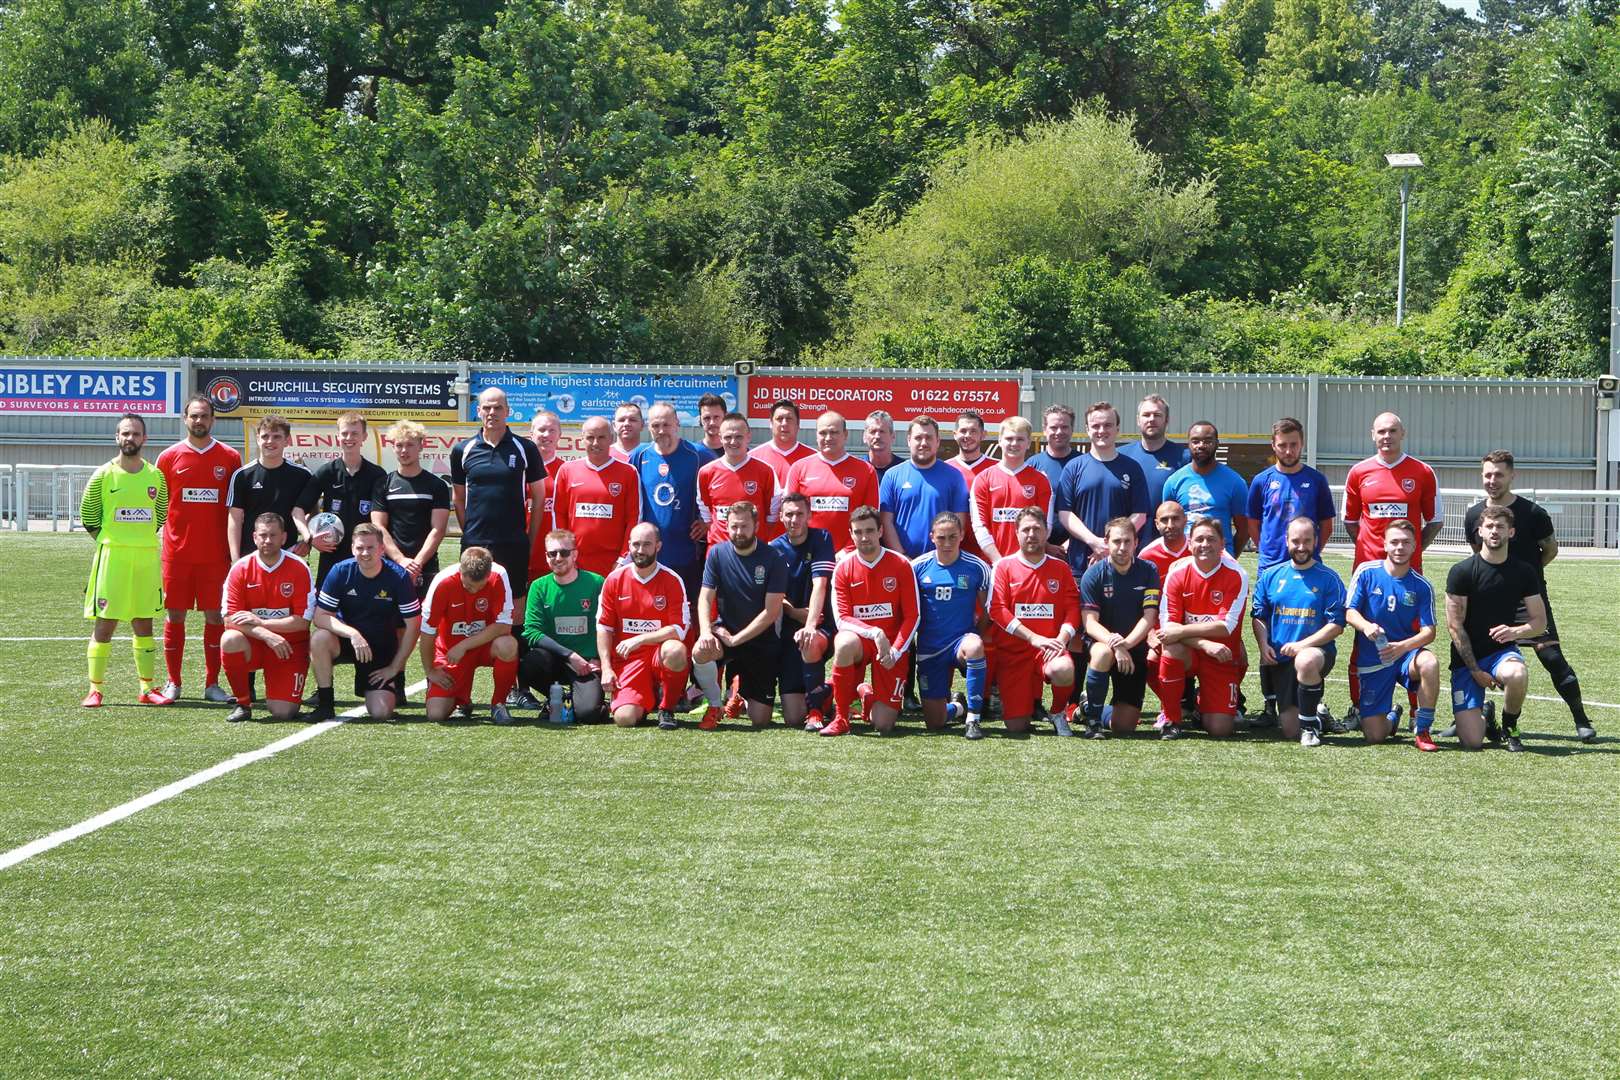 The teams: Maplesden Noakes School Staff in blue and Scout Leaders in red